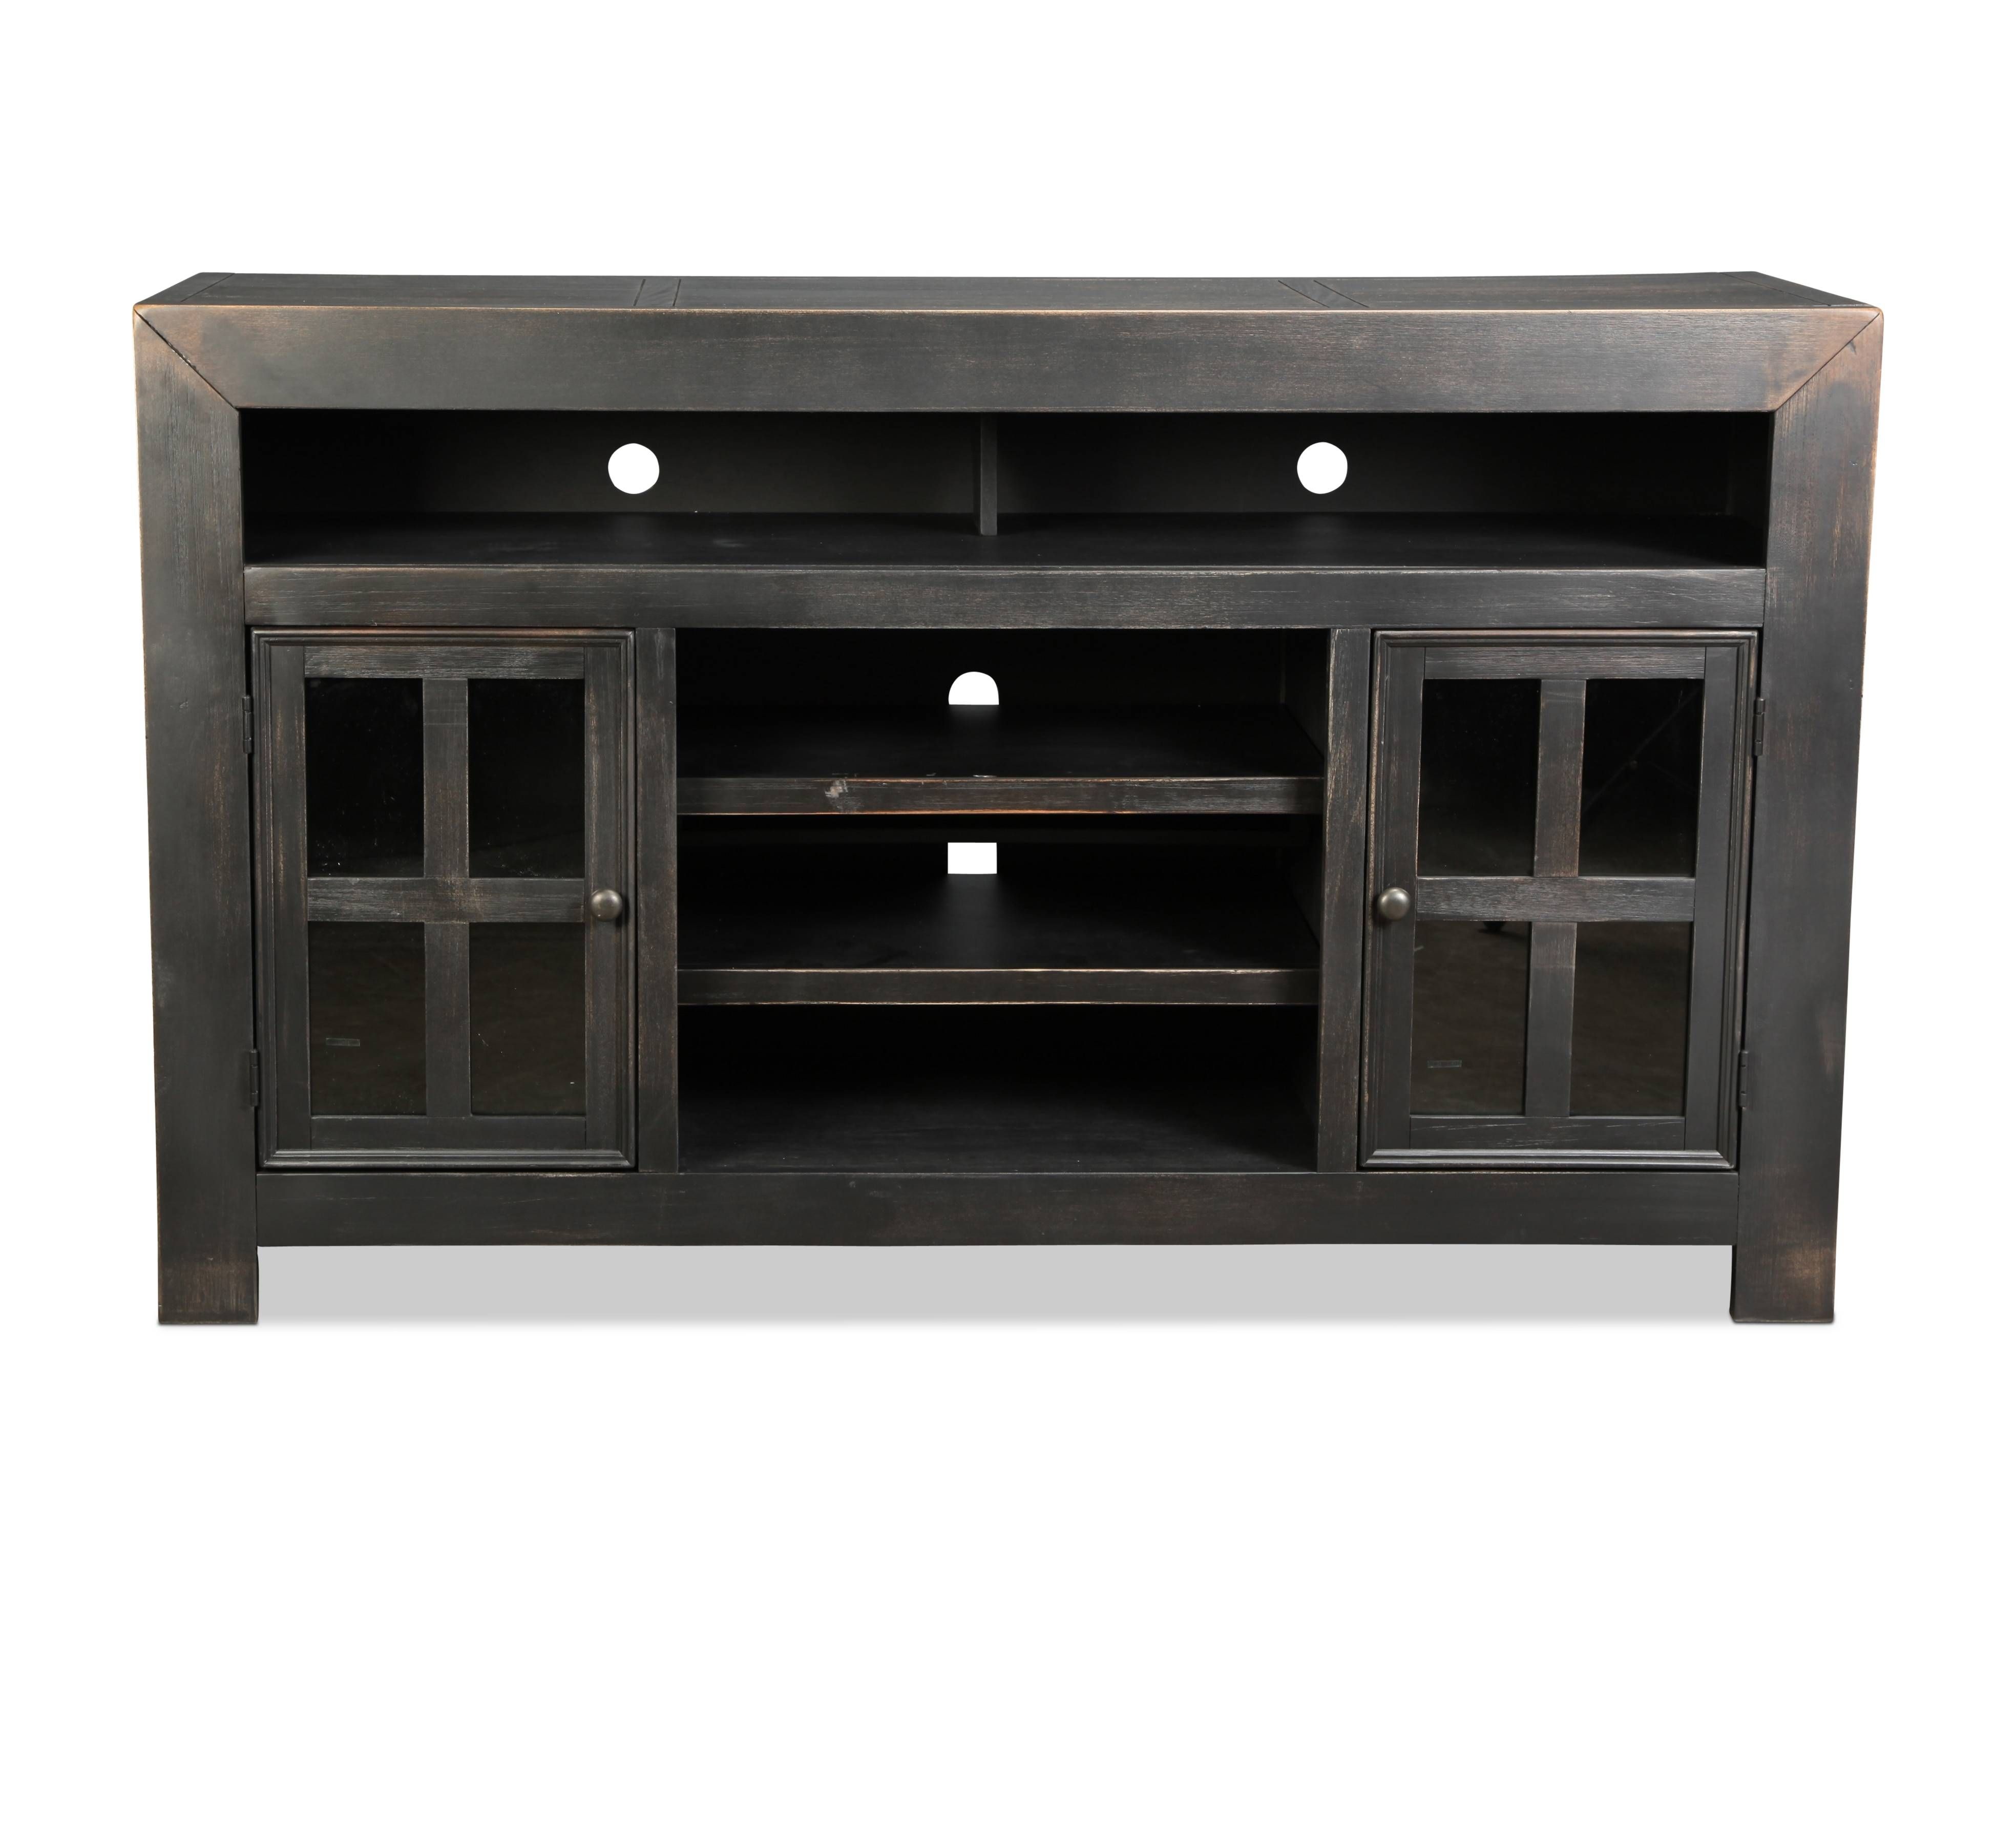 Tv Stands & Media Centers | Levin Furniture With Regard To 80 Inch Sideboards (View 30 of 30)